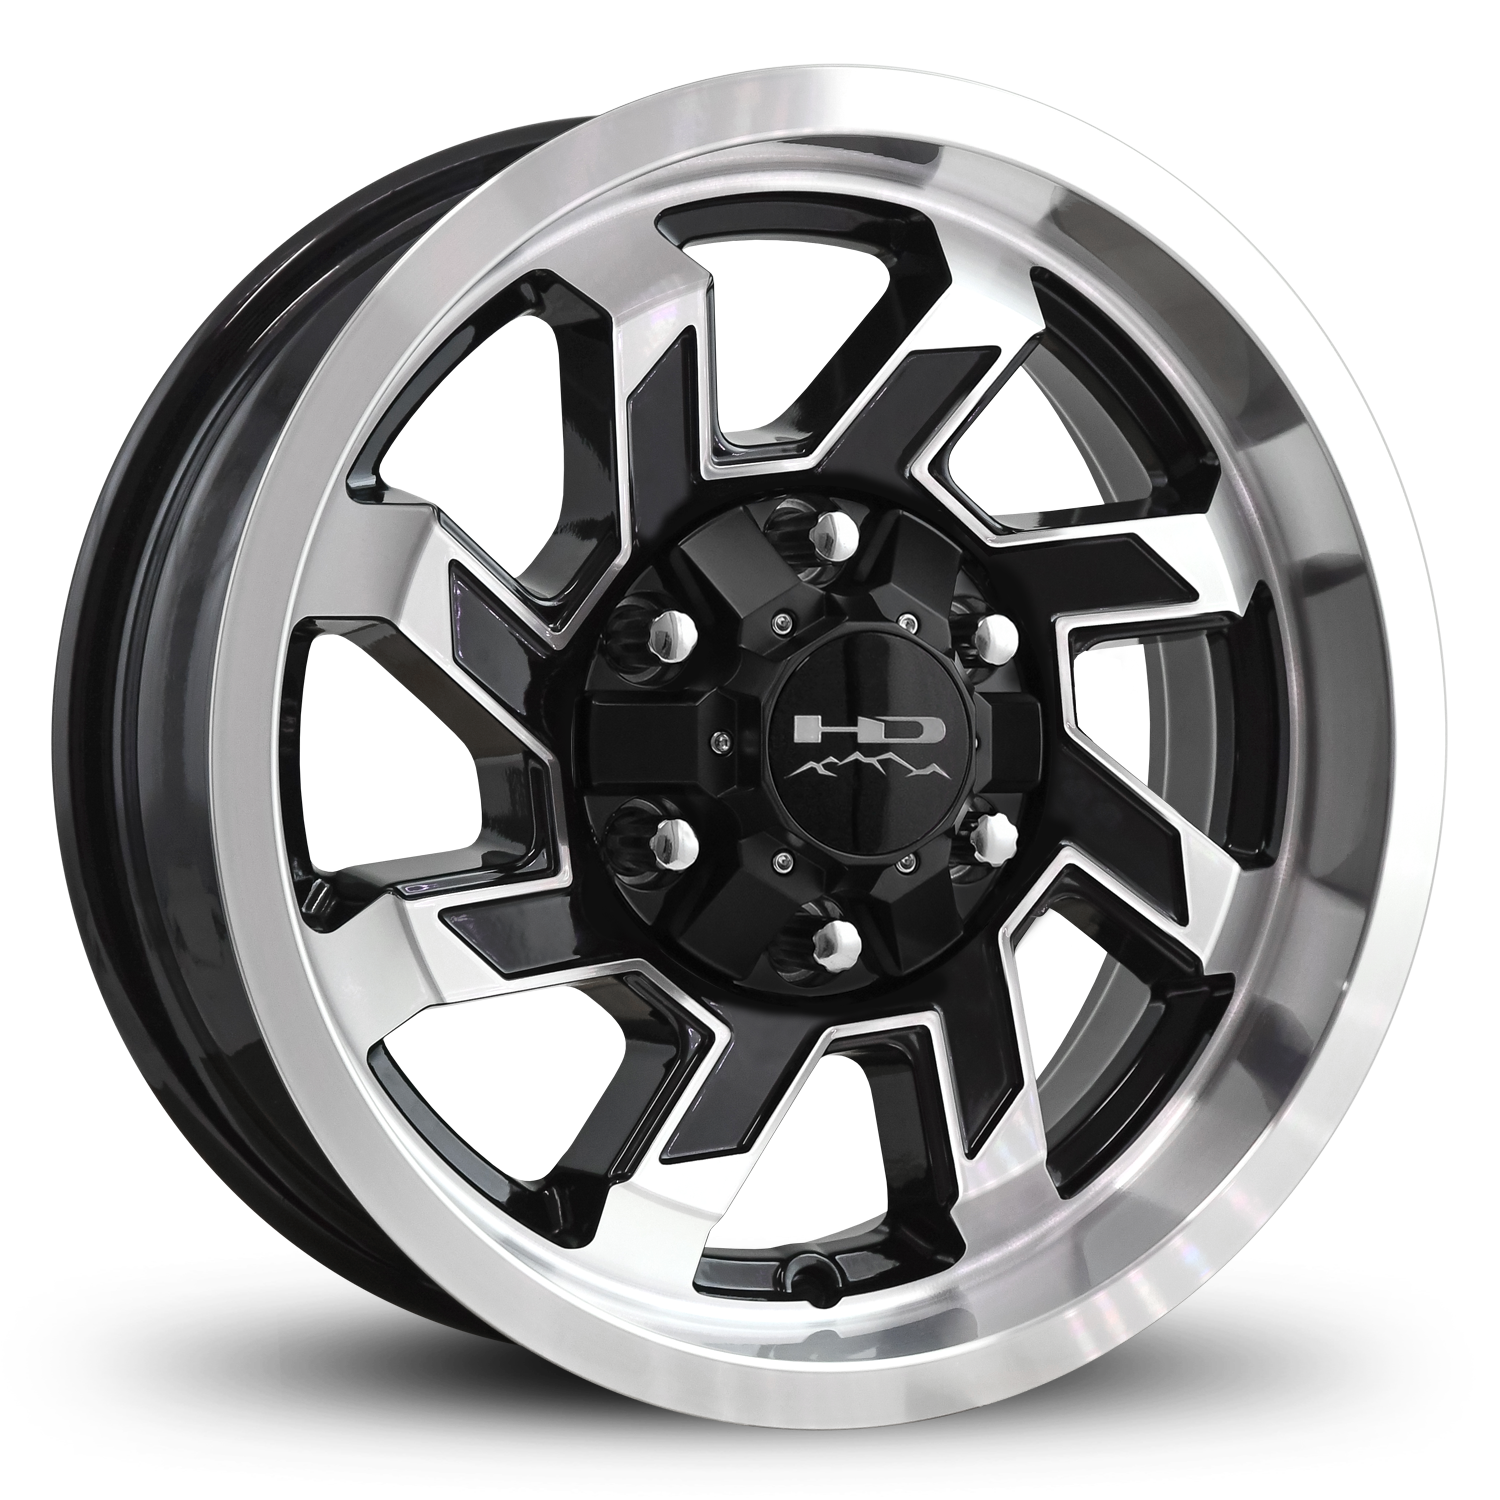 HD Off-Road SAW Custom Trailer Wheels in 15x6.0 in 6 lug Gloss Black Machined Face & Lip for Unility, Boat, Car, Construction, Horse, & RV